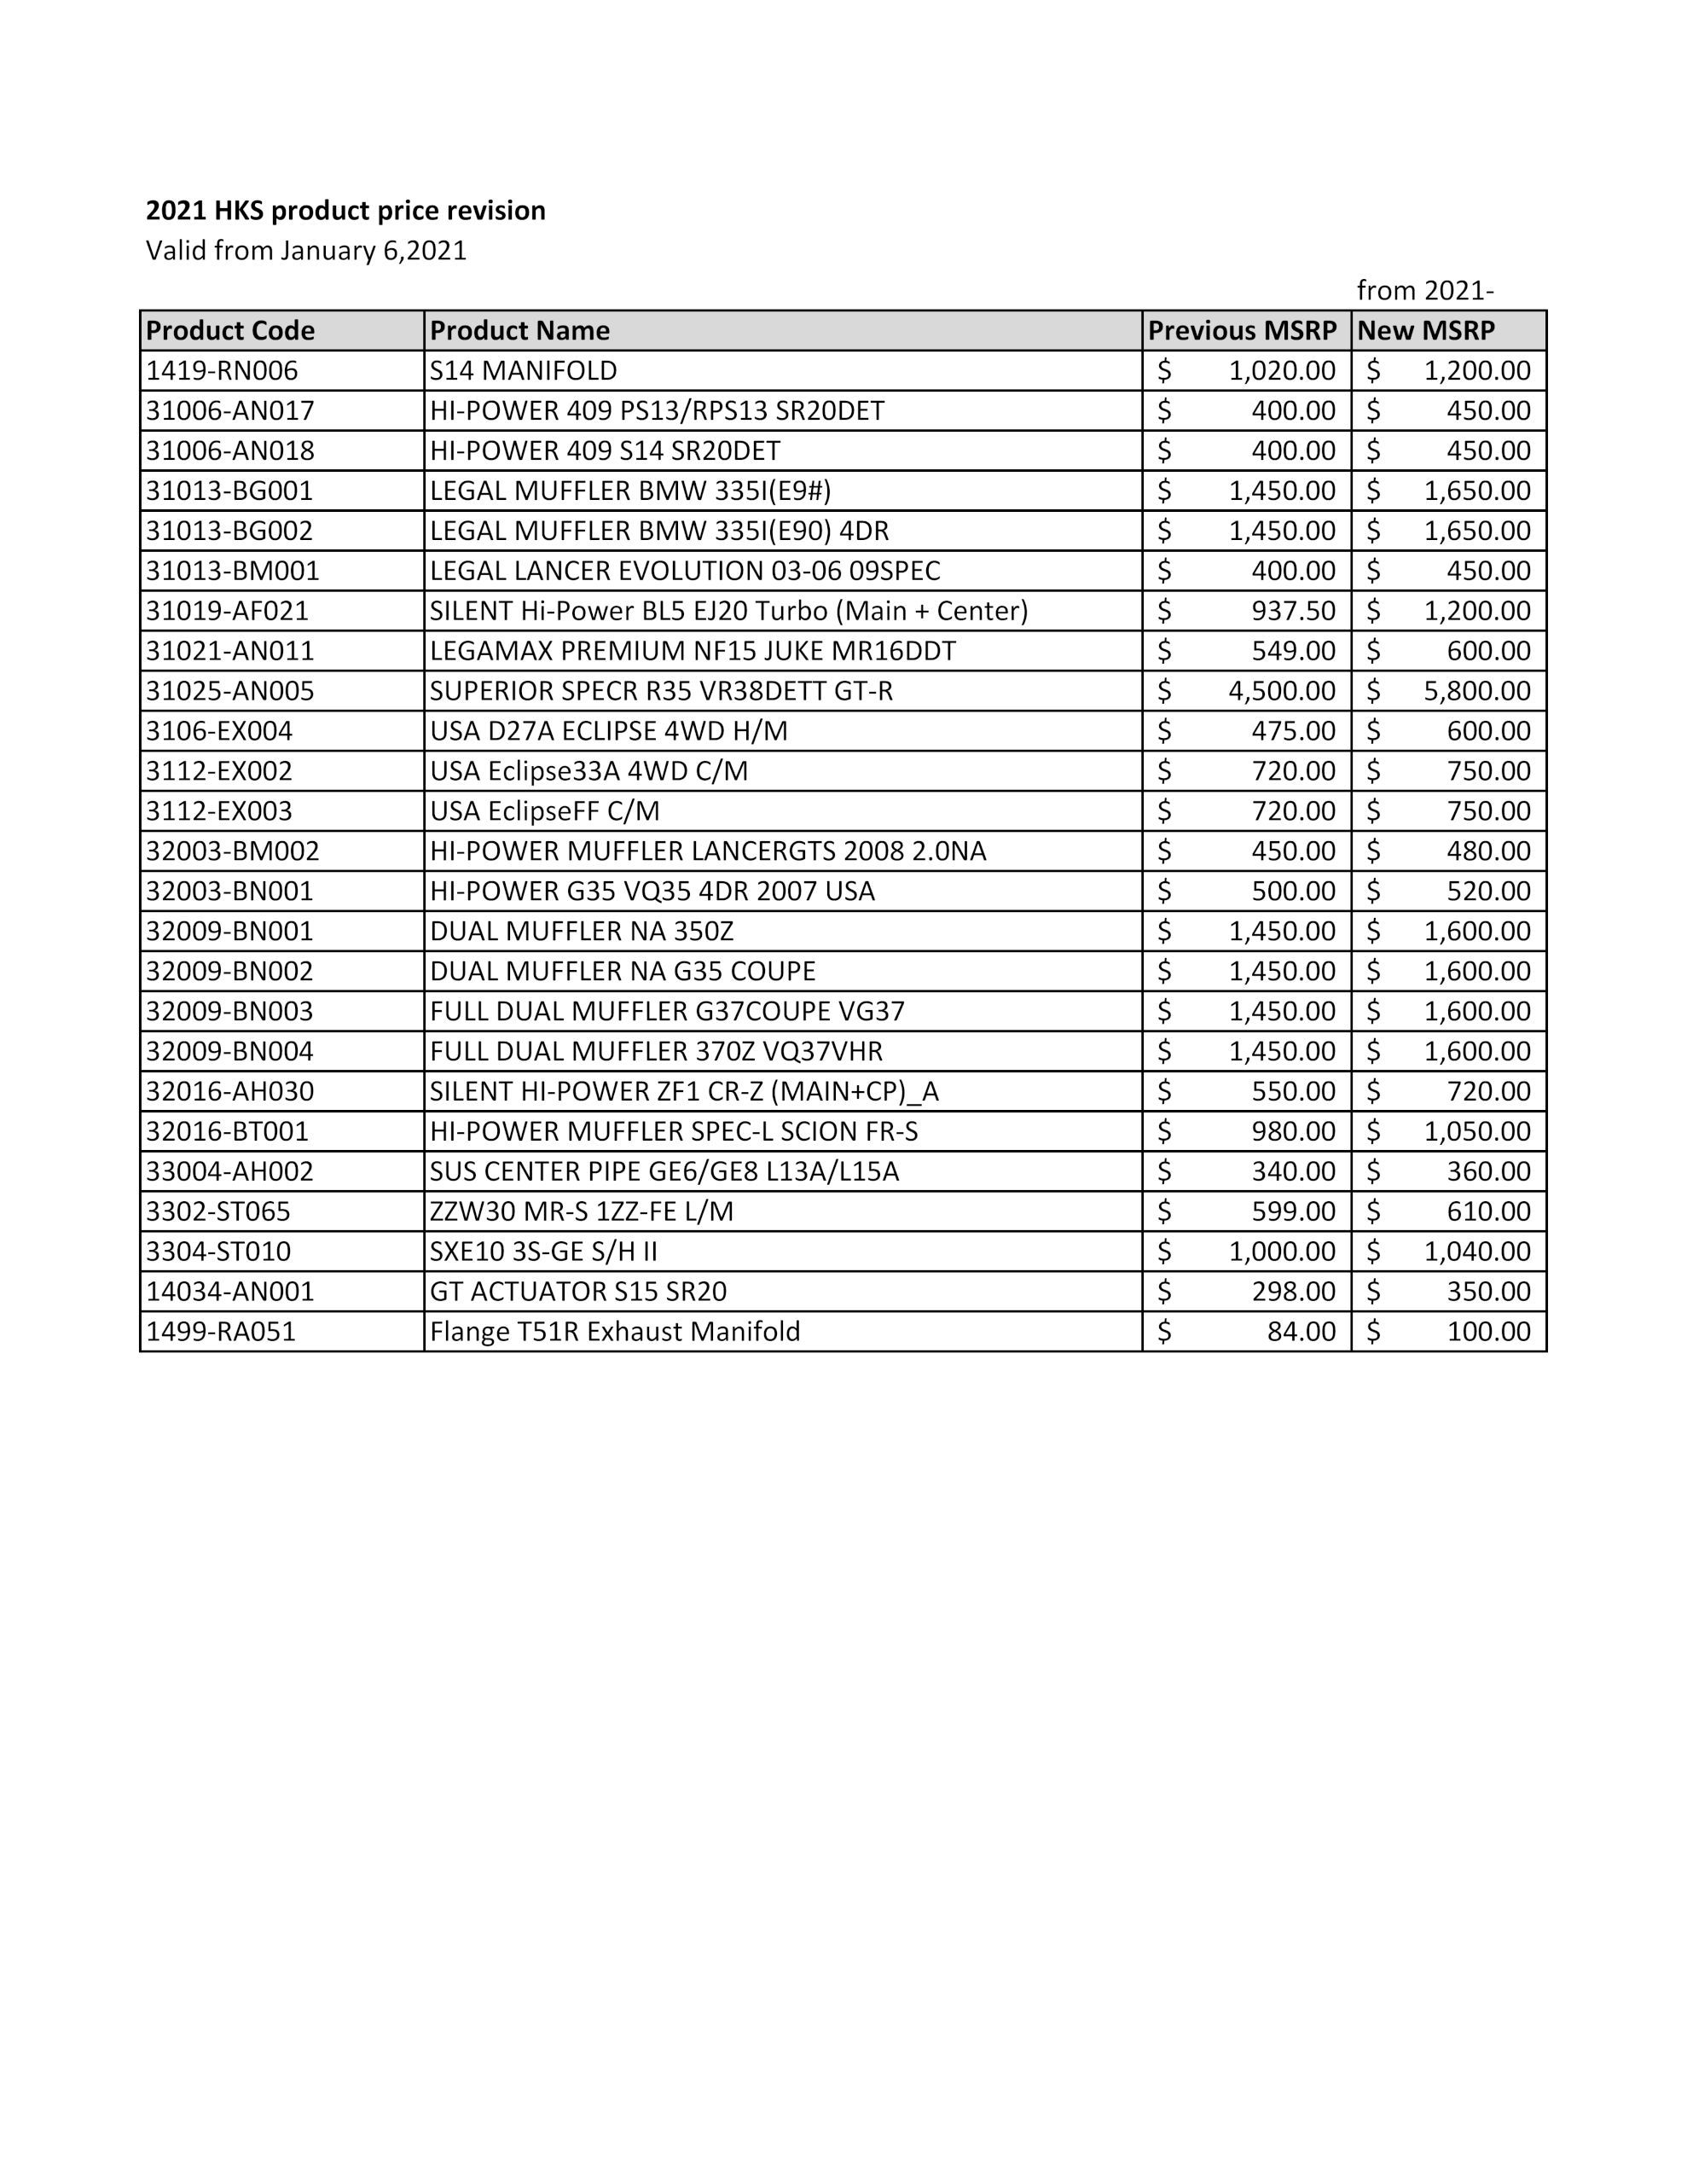 2021 HKS Product Price revision.png